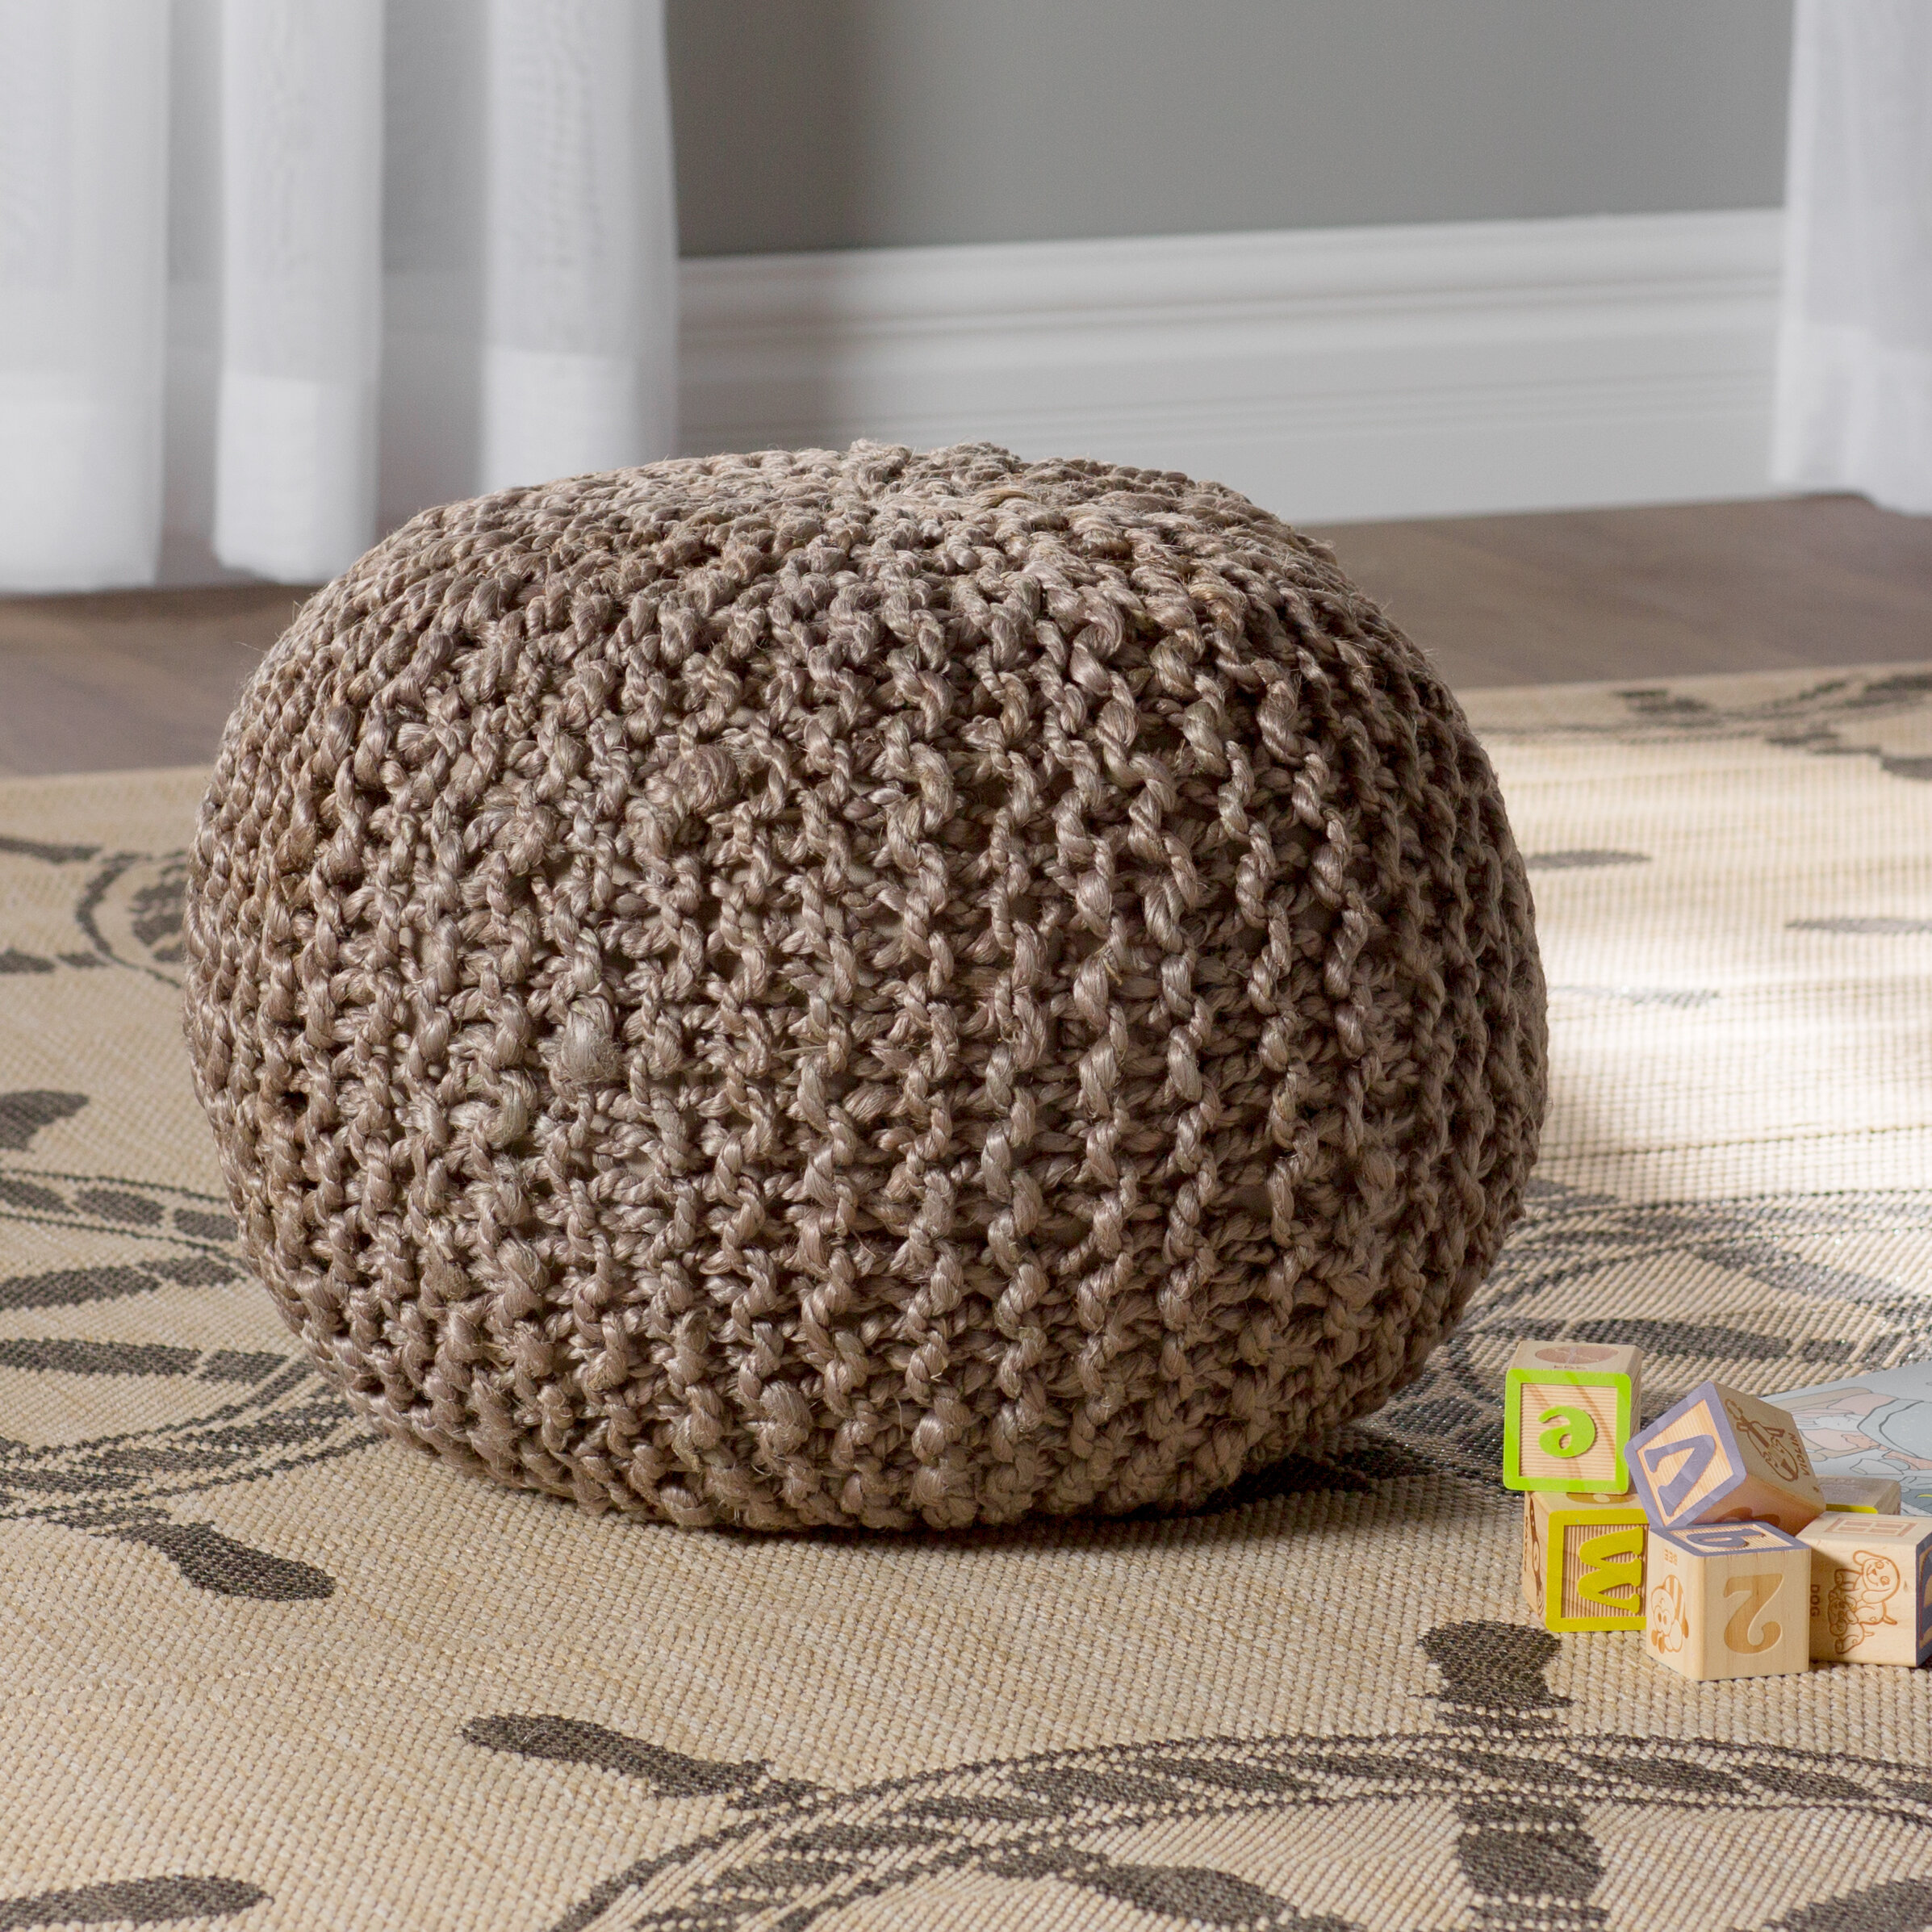 Modern Beige//Black Cube Shape Wool Pouf Brown Striped Lake House Contemporary Nautical Coastal Pattern Solid Square